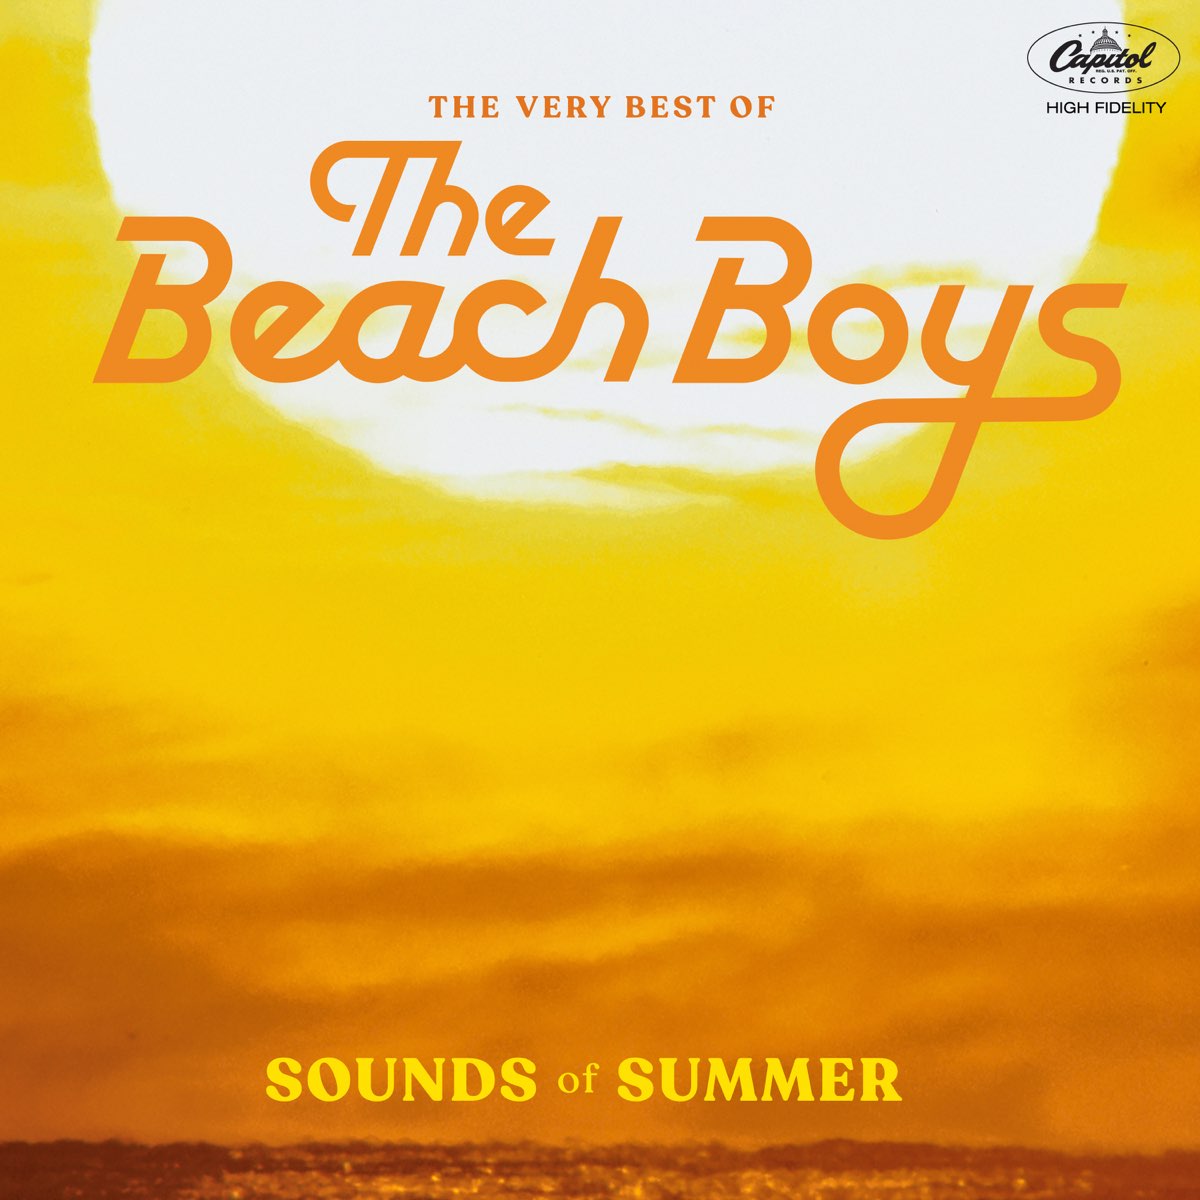 ‎The Very Best Of The Beach Boys: Sounds Of Summer by The Beach Boys on ...